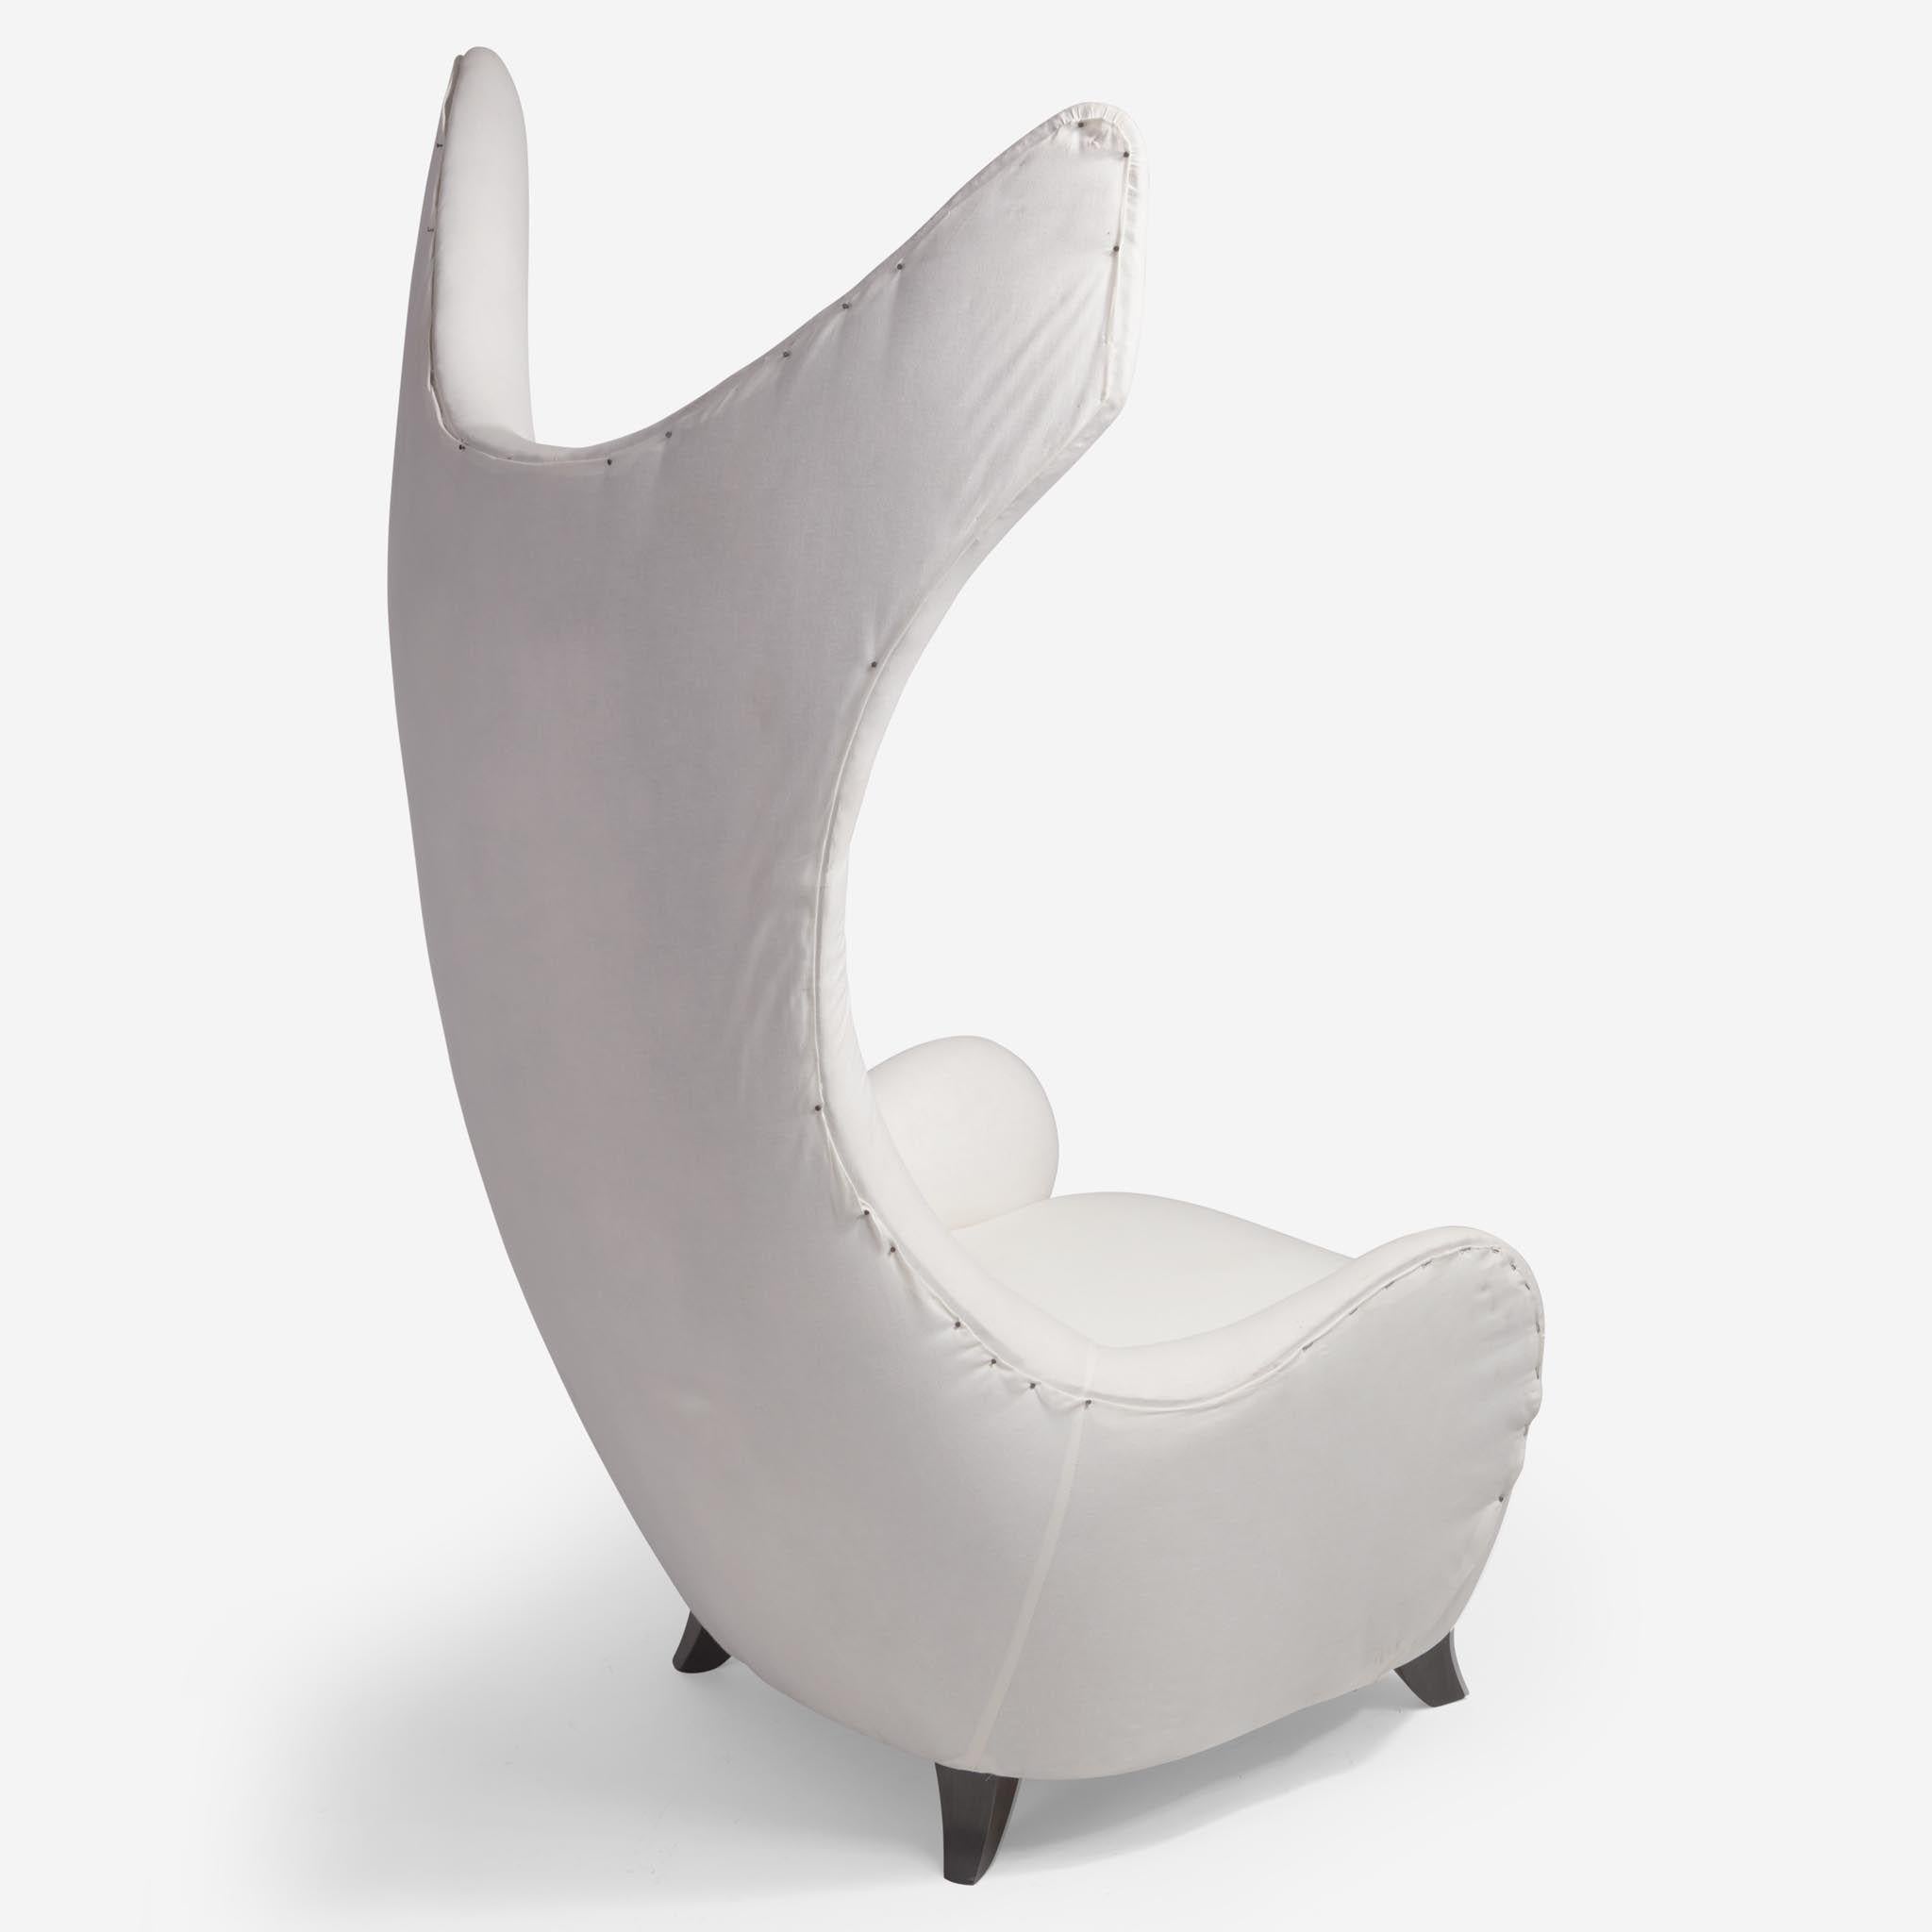 Exceptional and one of a kind dramatic winged back chair designed by Vladimir Kagan for Baroness Lambert. Shortly before Kagan's death, the Baroness had asked for the two chairs to be completed. The chairs served as the model for a design Kagan